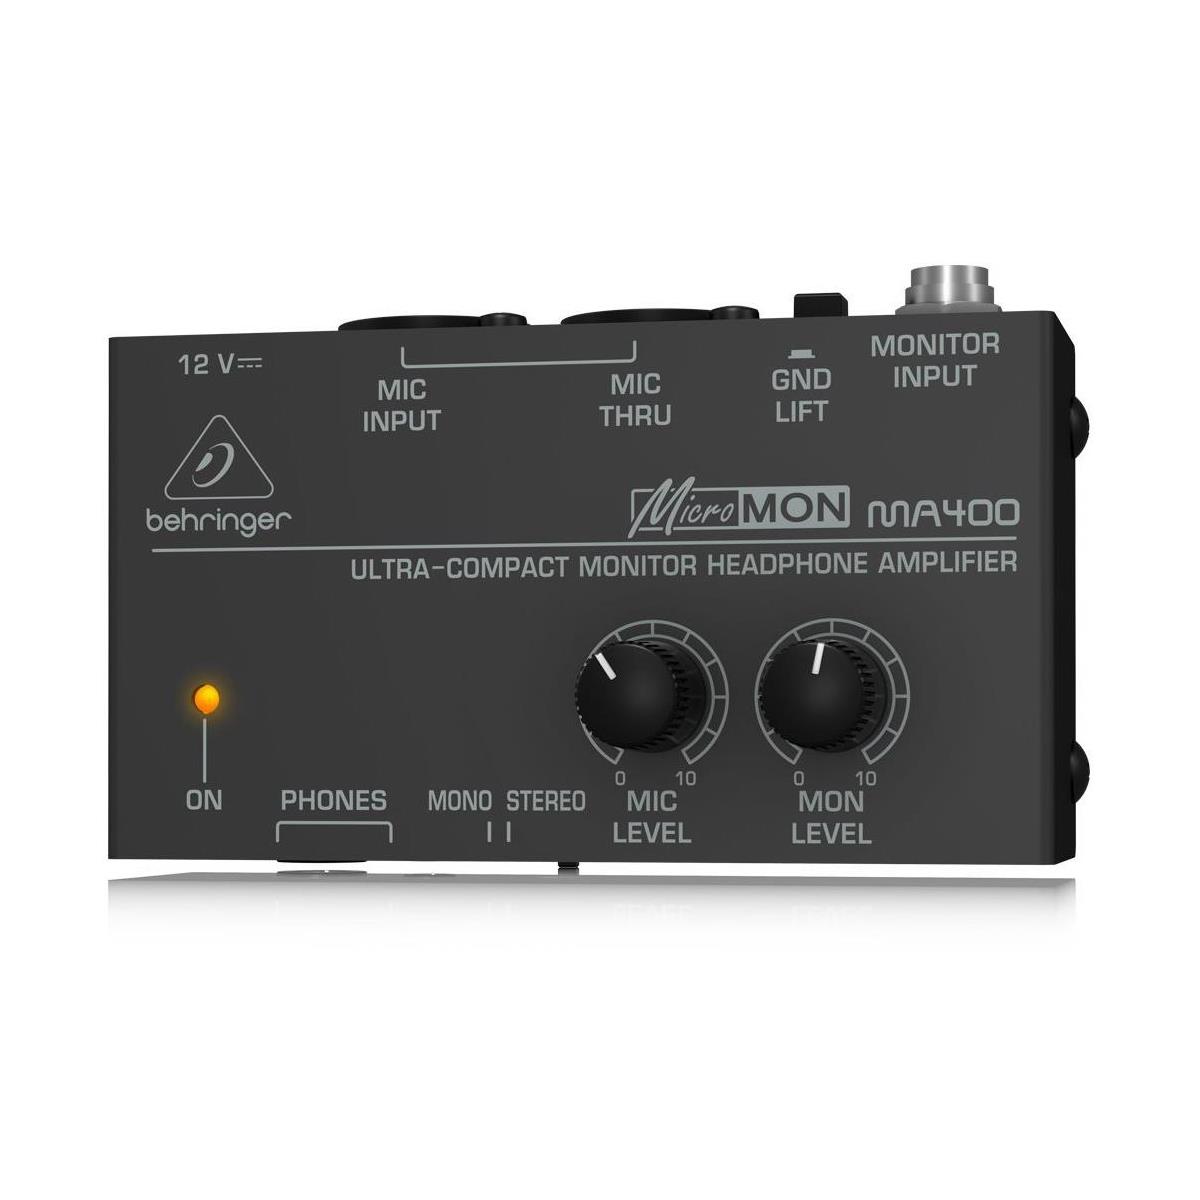 Image of Behringer Micromon MA400 Monitor Headphone Amplifier